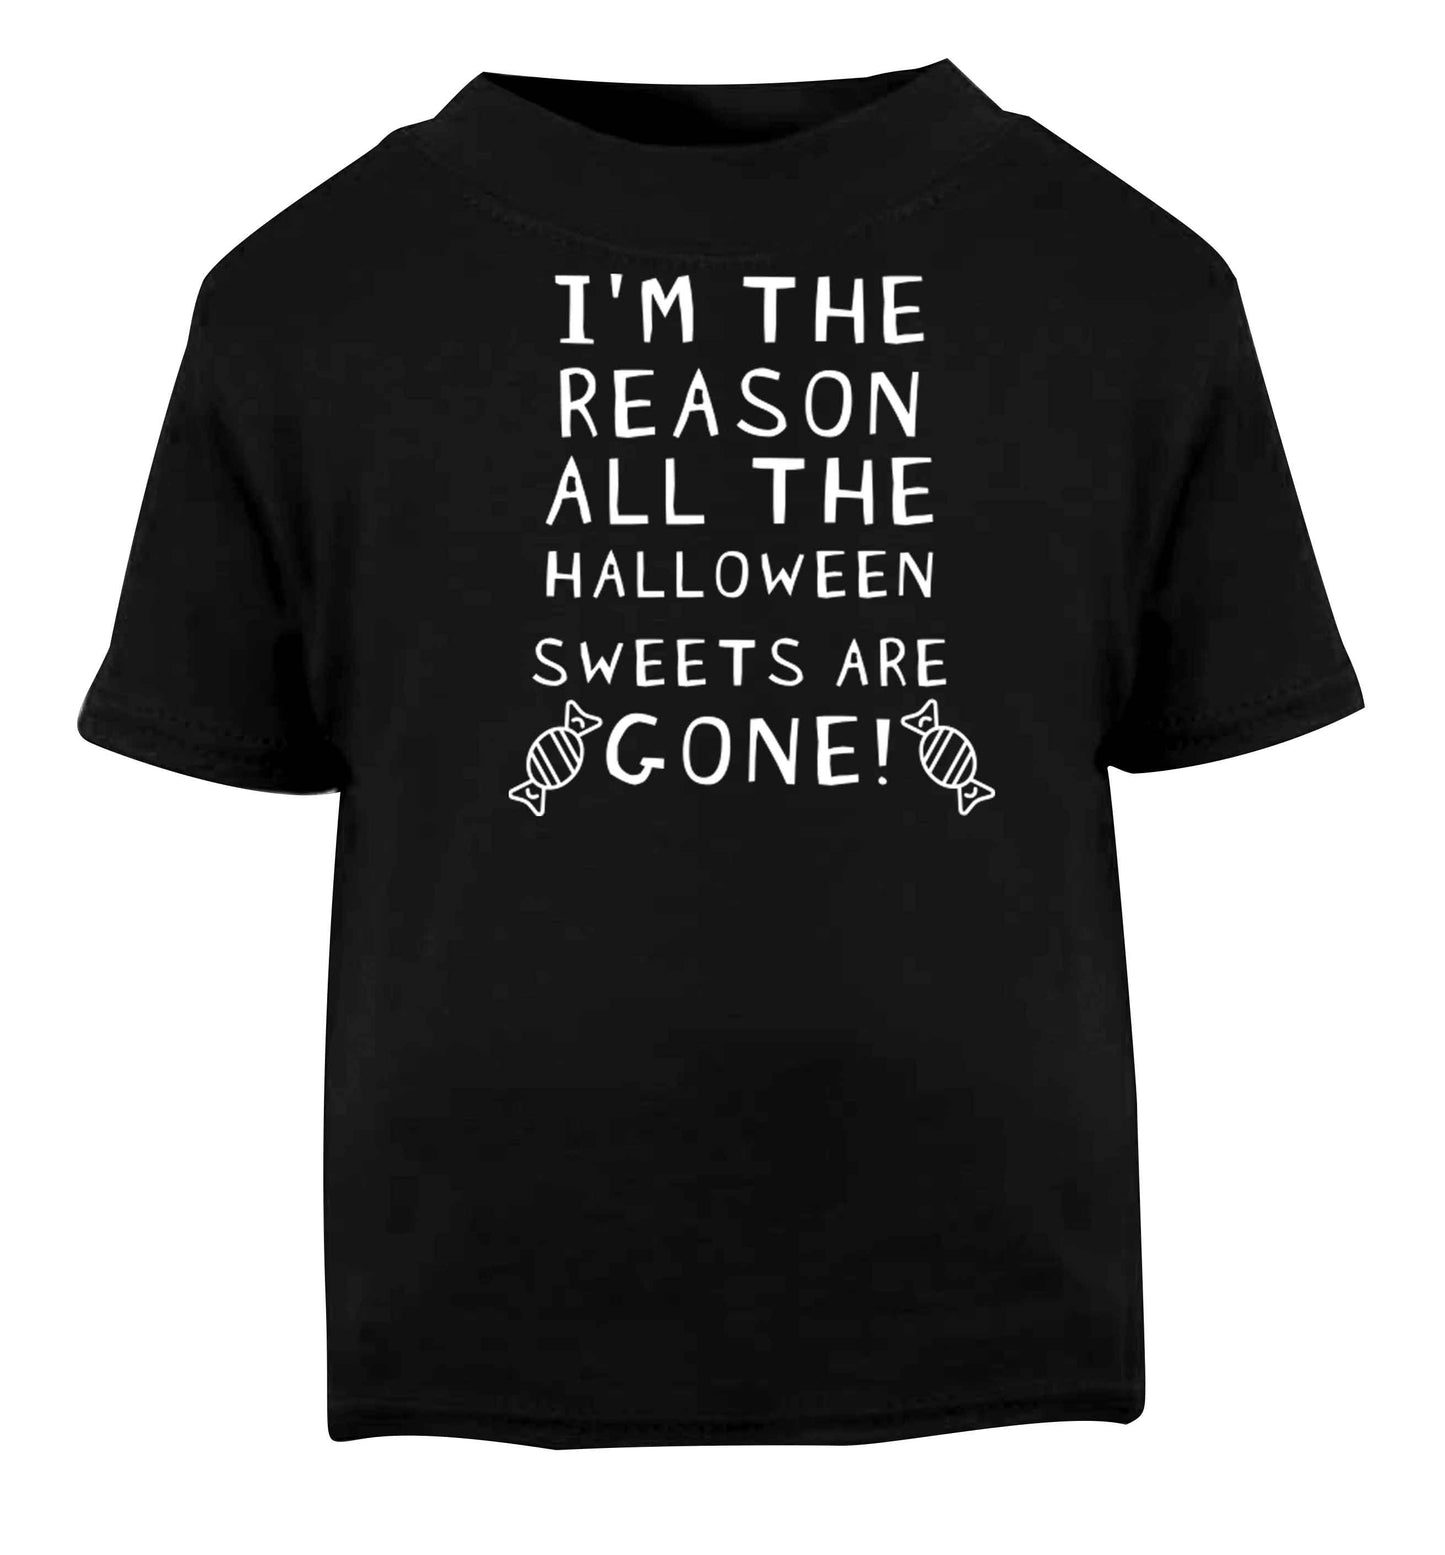 I'm the reason all of the halloween sweets are gone Black baby toddler Tshirt 2 years